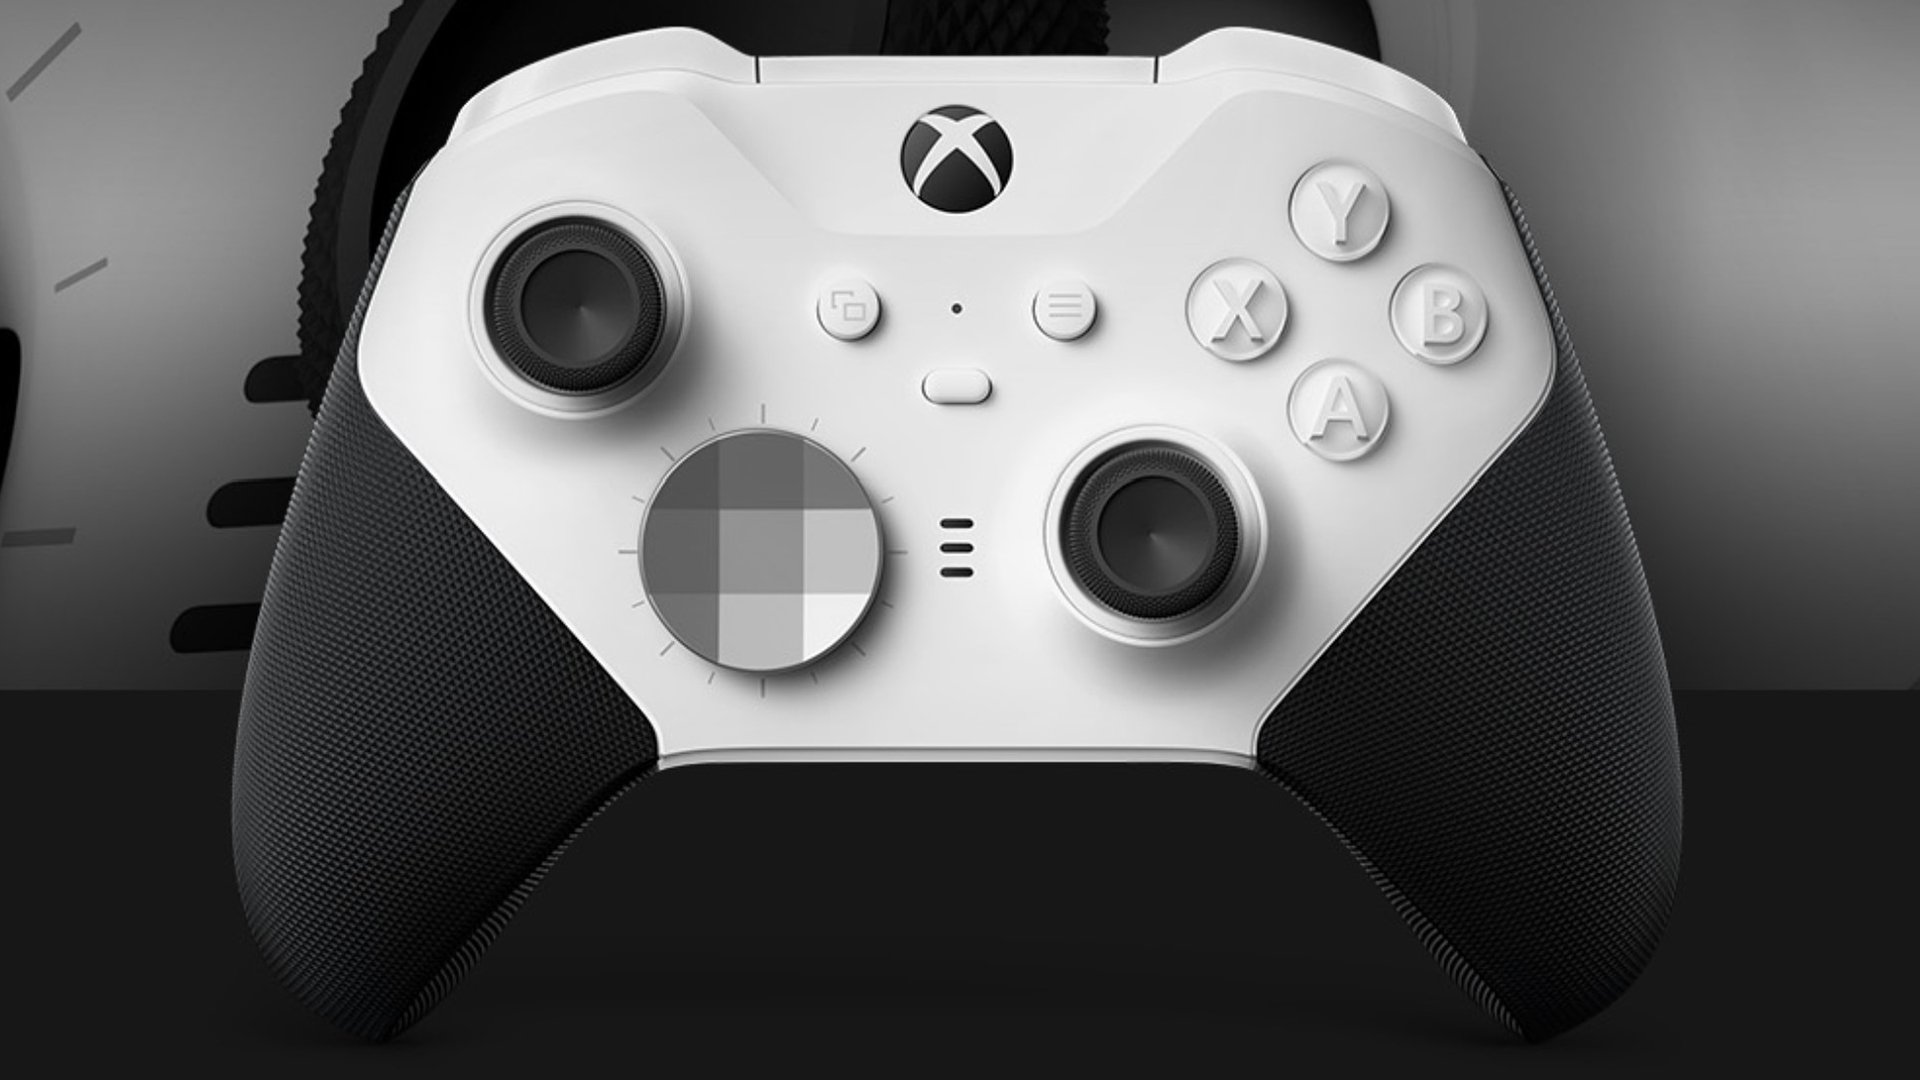 The white Xbox Elite Series 2 controller is official, and $50